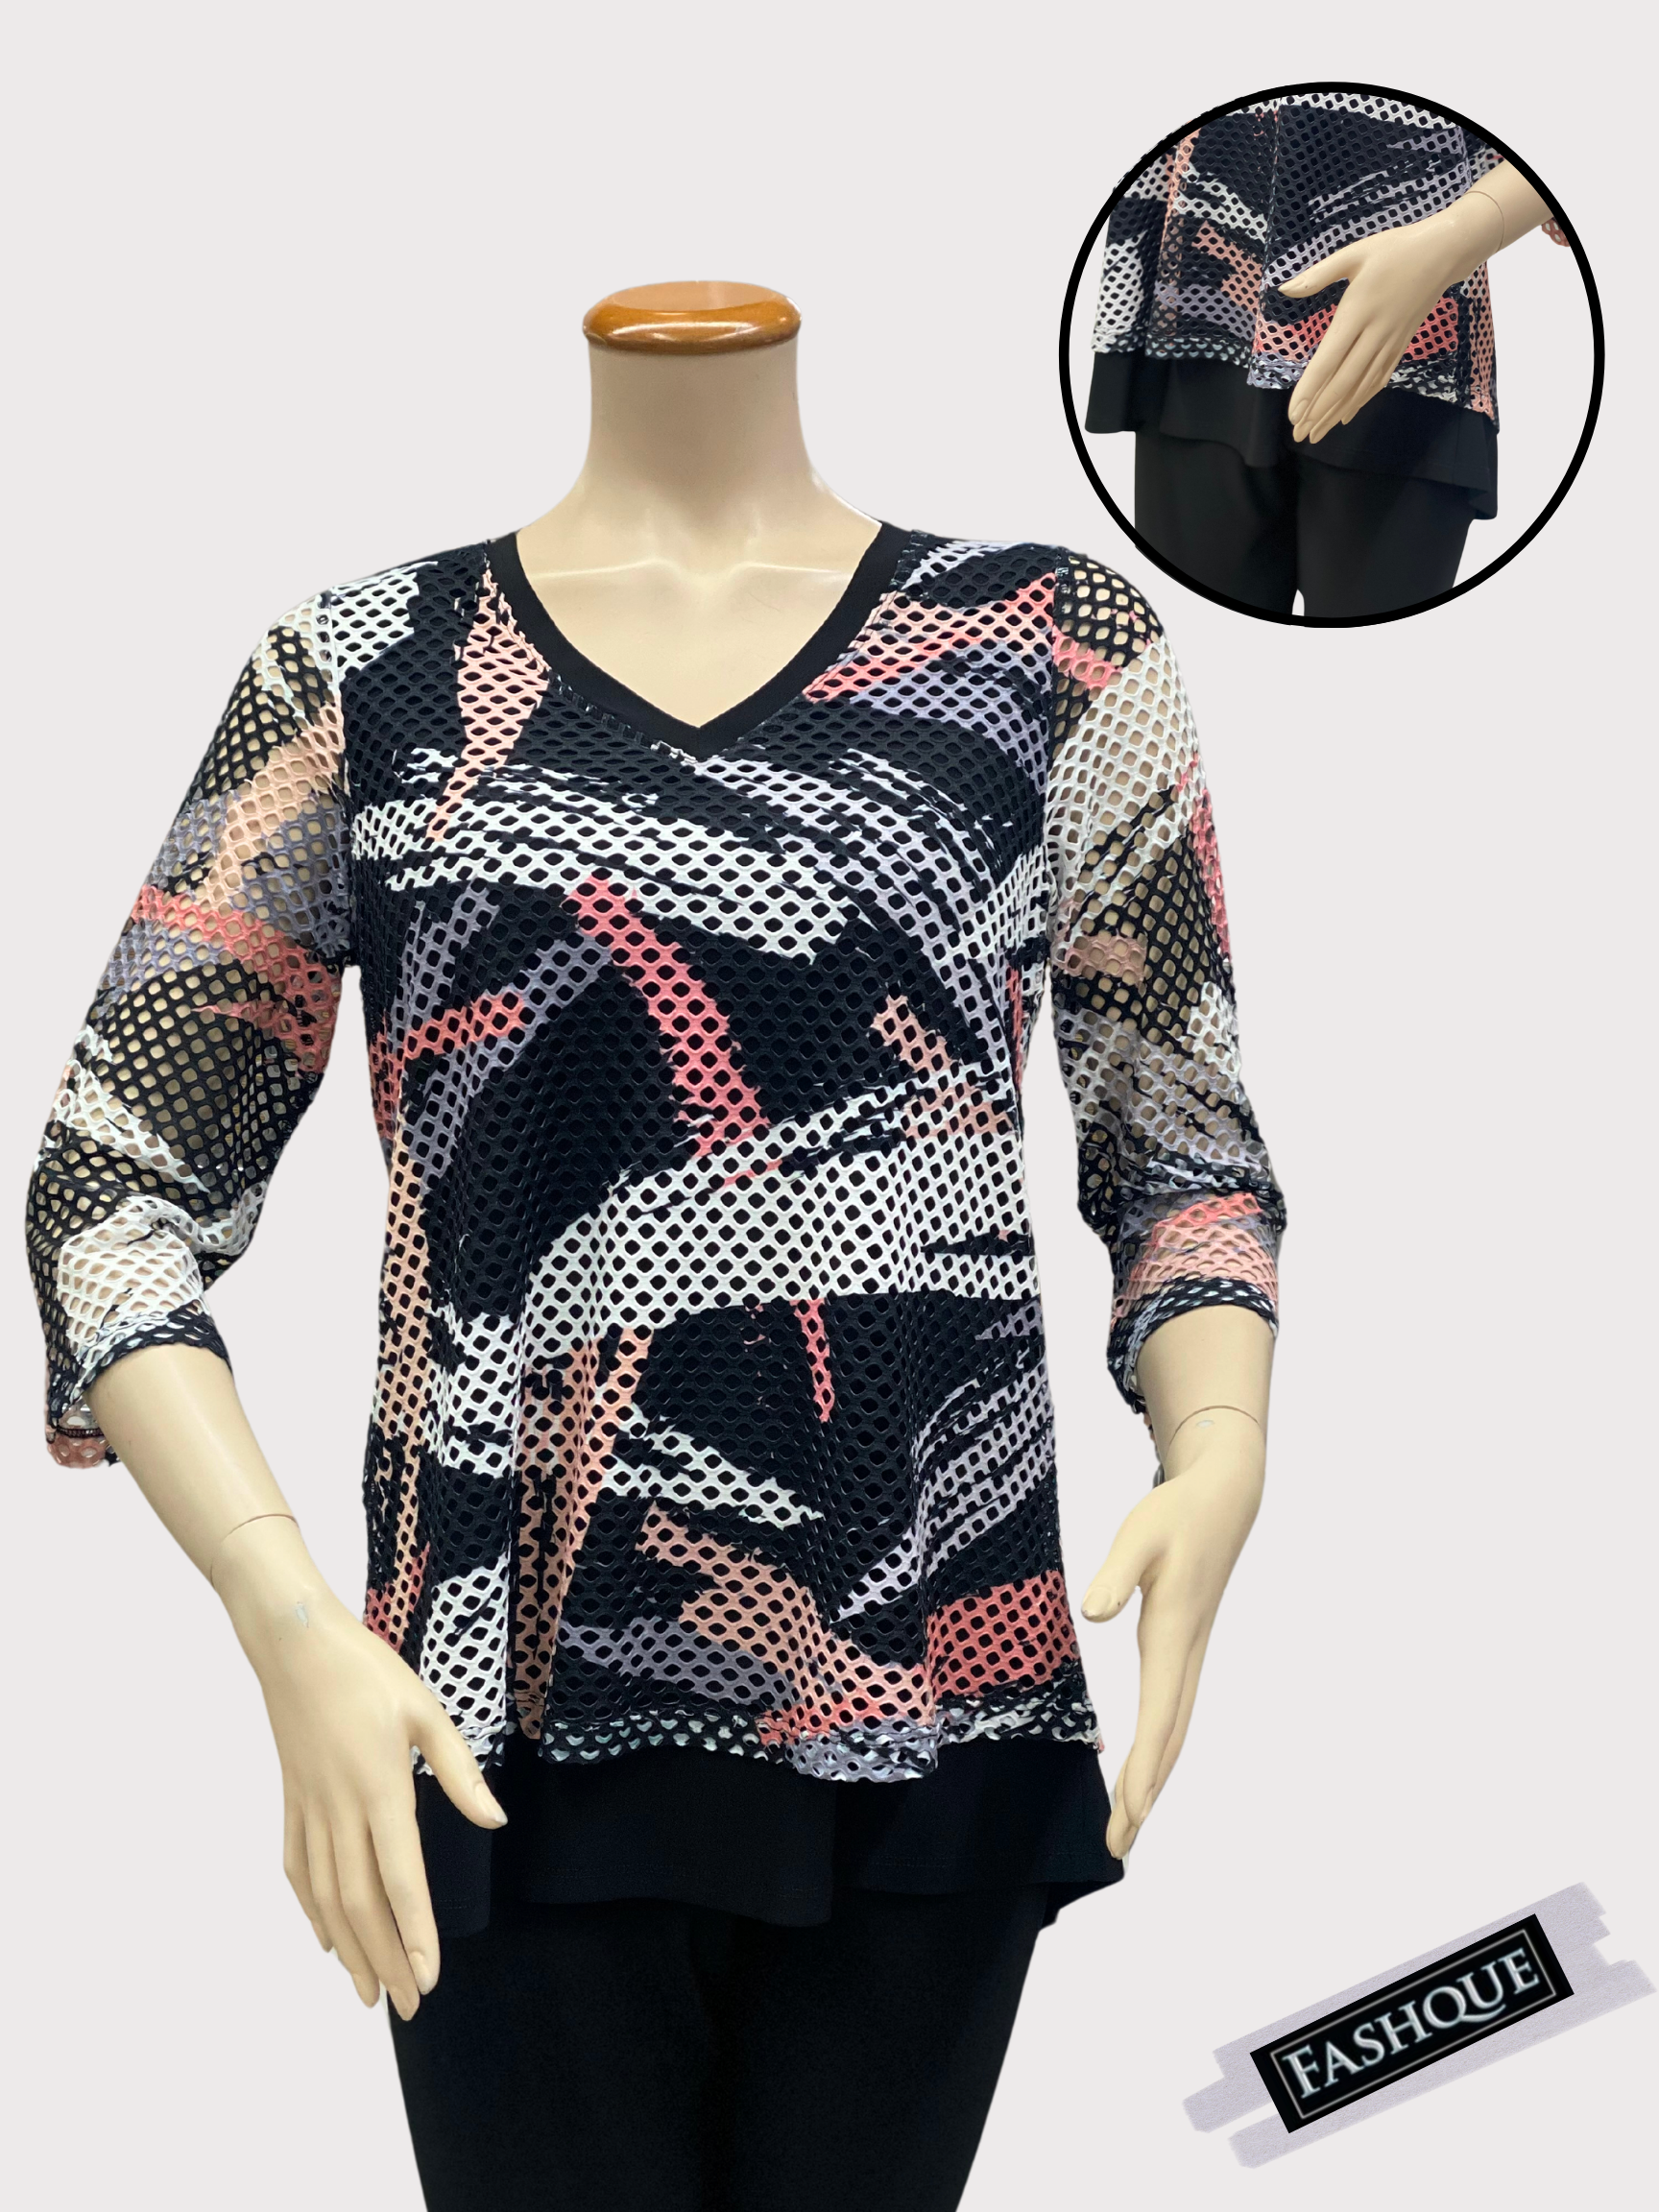 FASHQUE - V NECK MULTI MEDIA WITH MESH LAYERED 3/4 SLEEVS TOP  - T2103